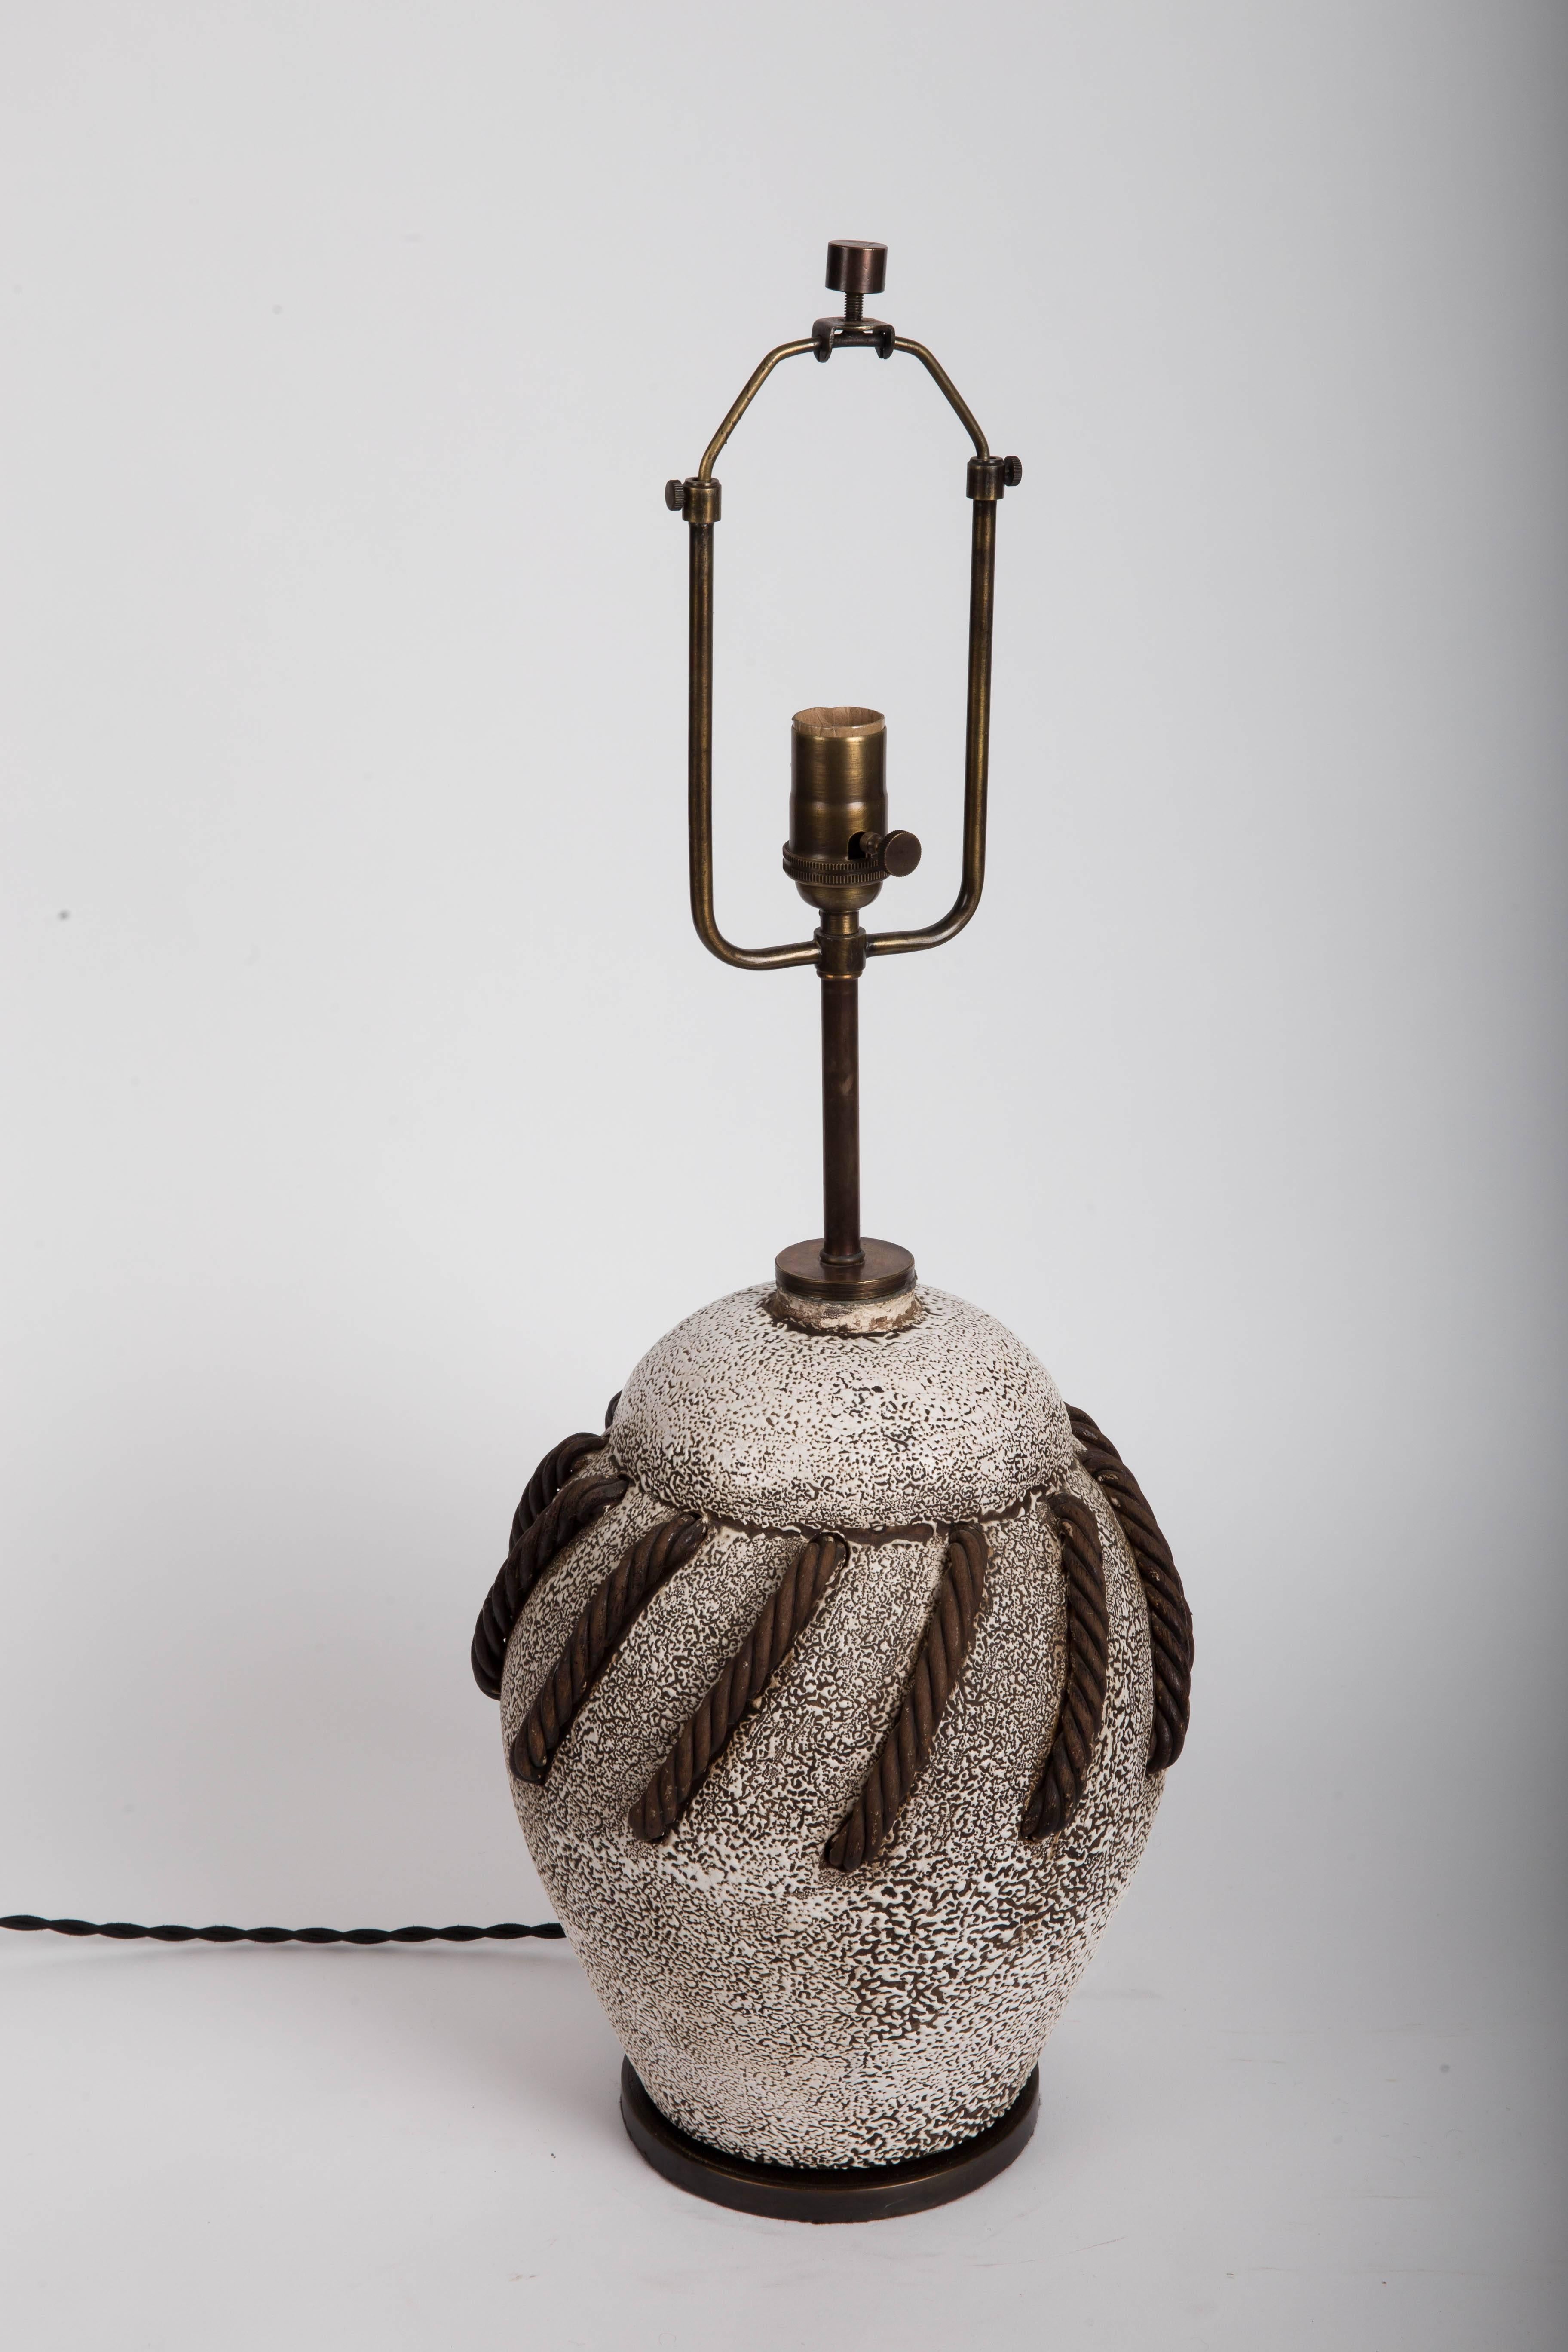 Textured Brown + White Ceramic Lamp with Rope Detailing 4